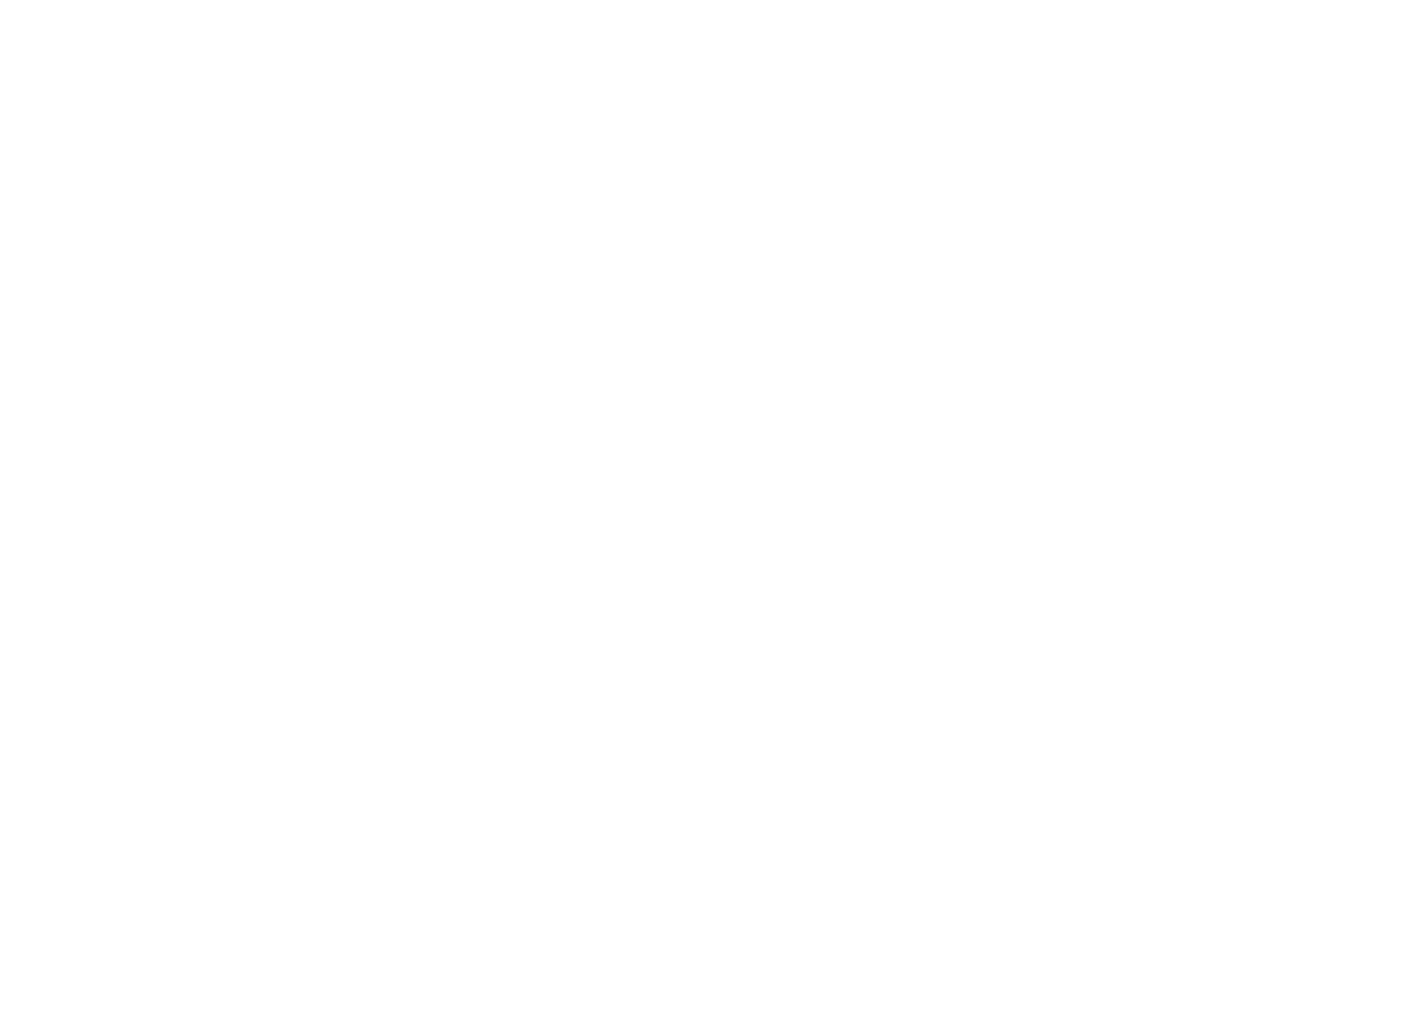 Earthly Angels Home Healthcare Services LLC